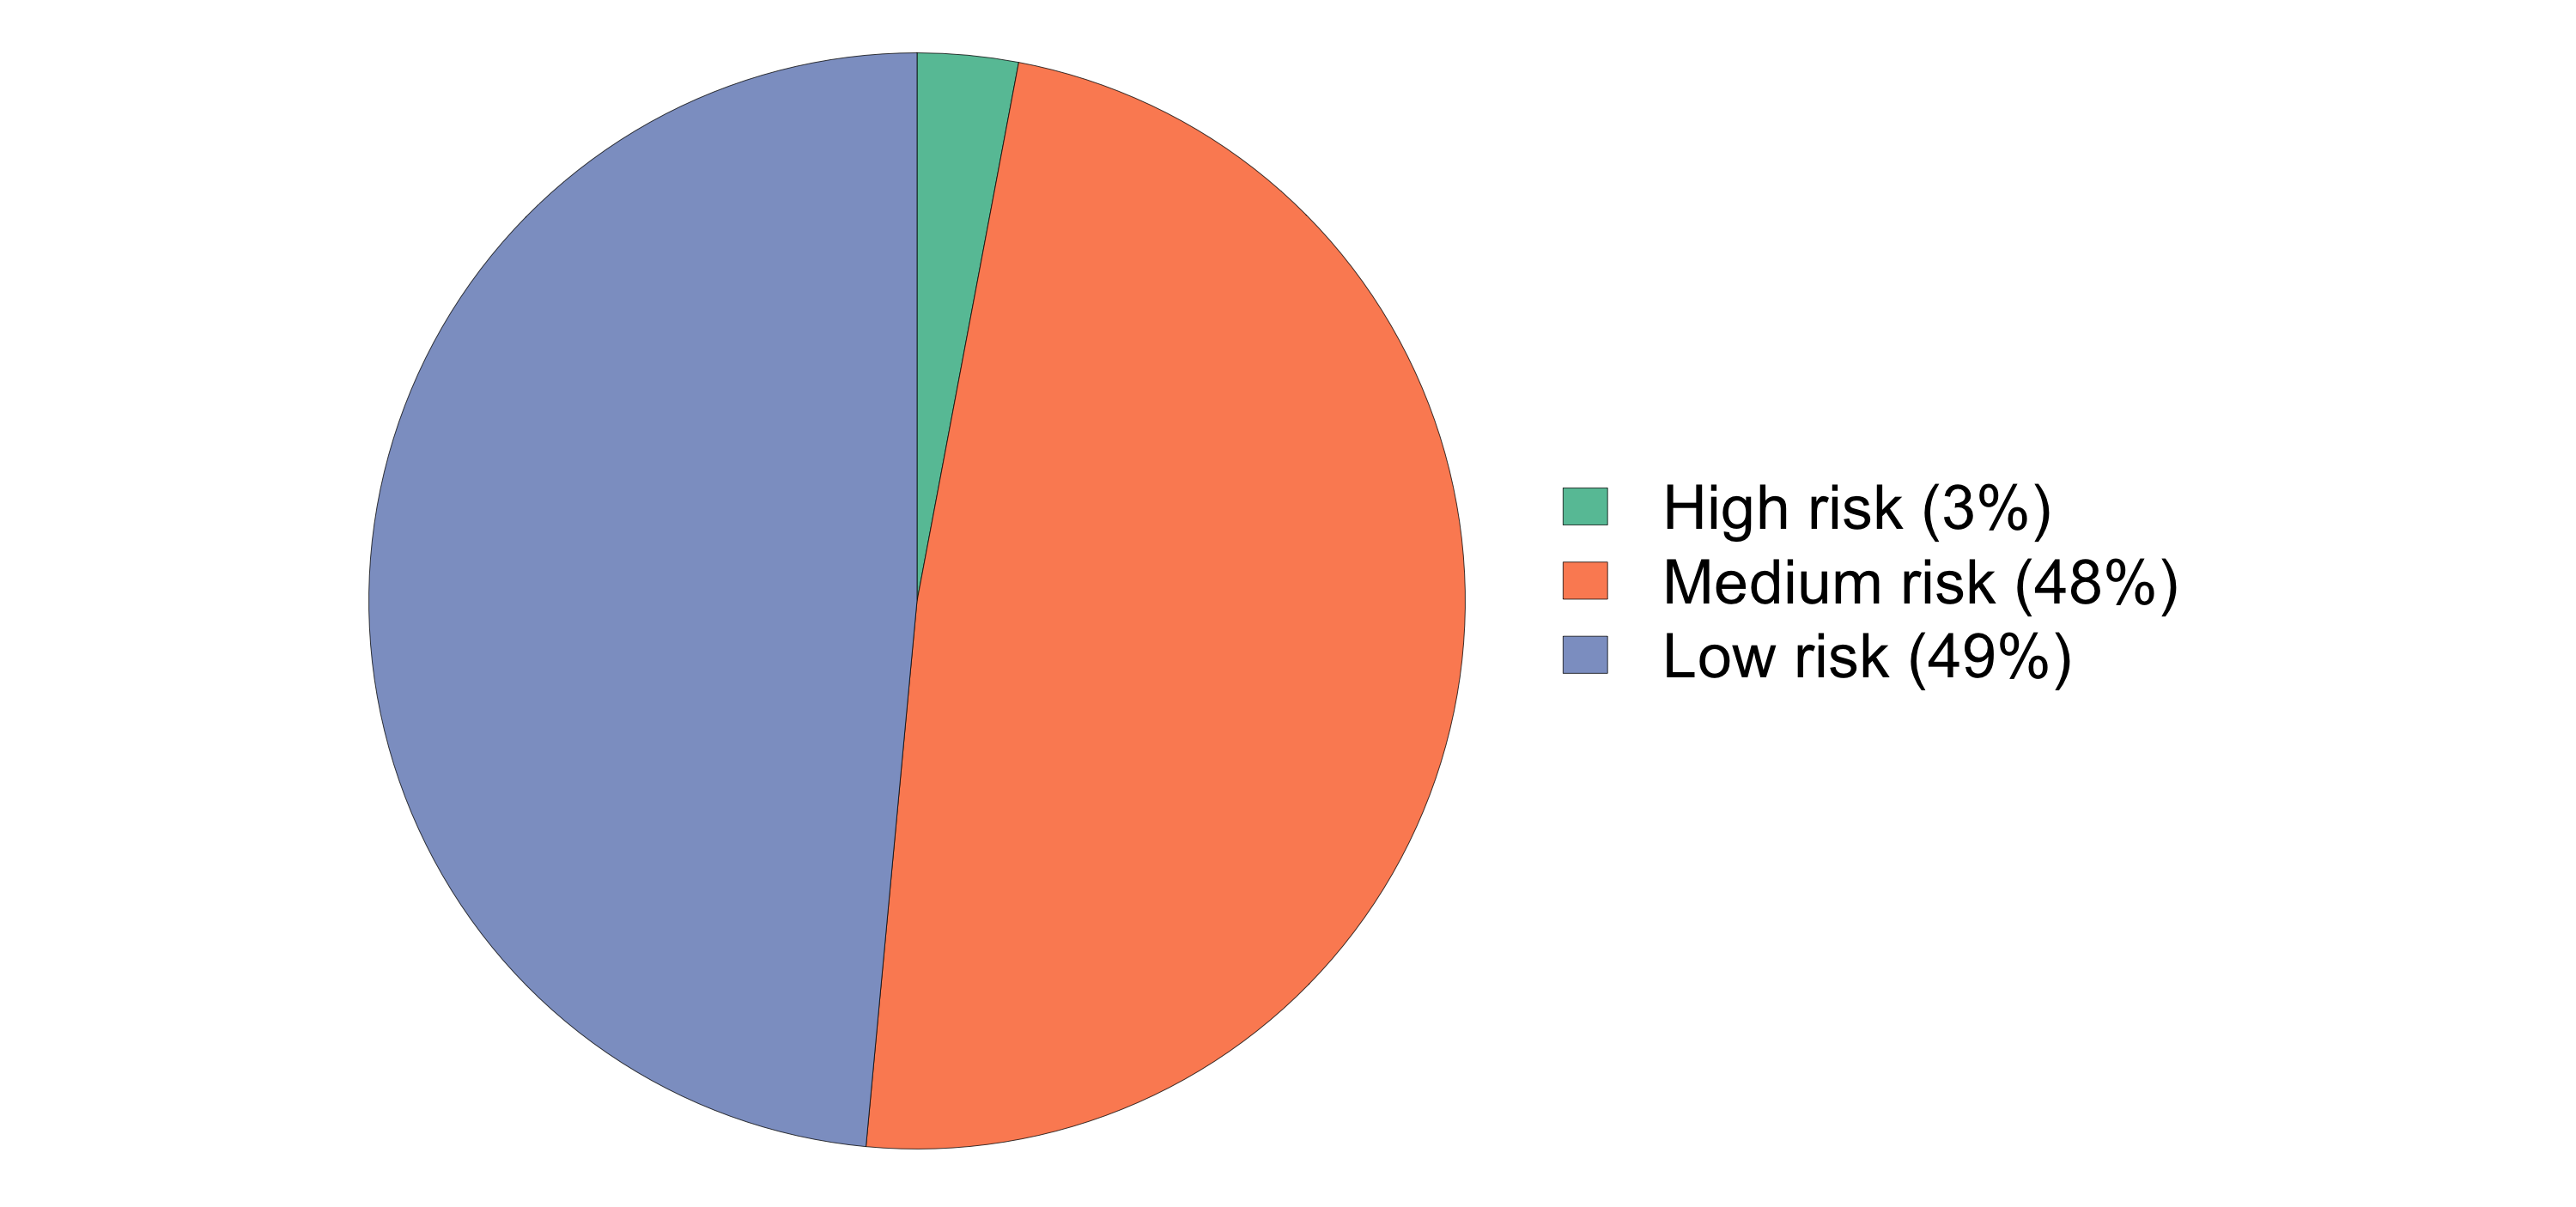 A pie chart showing the percentages discussed (High risk 2%, medium risk 48%, low risk 49%).